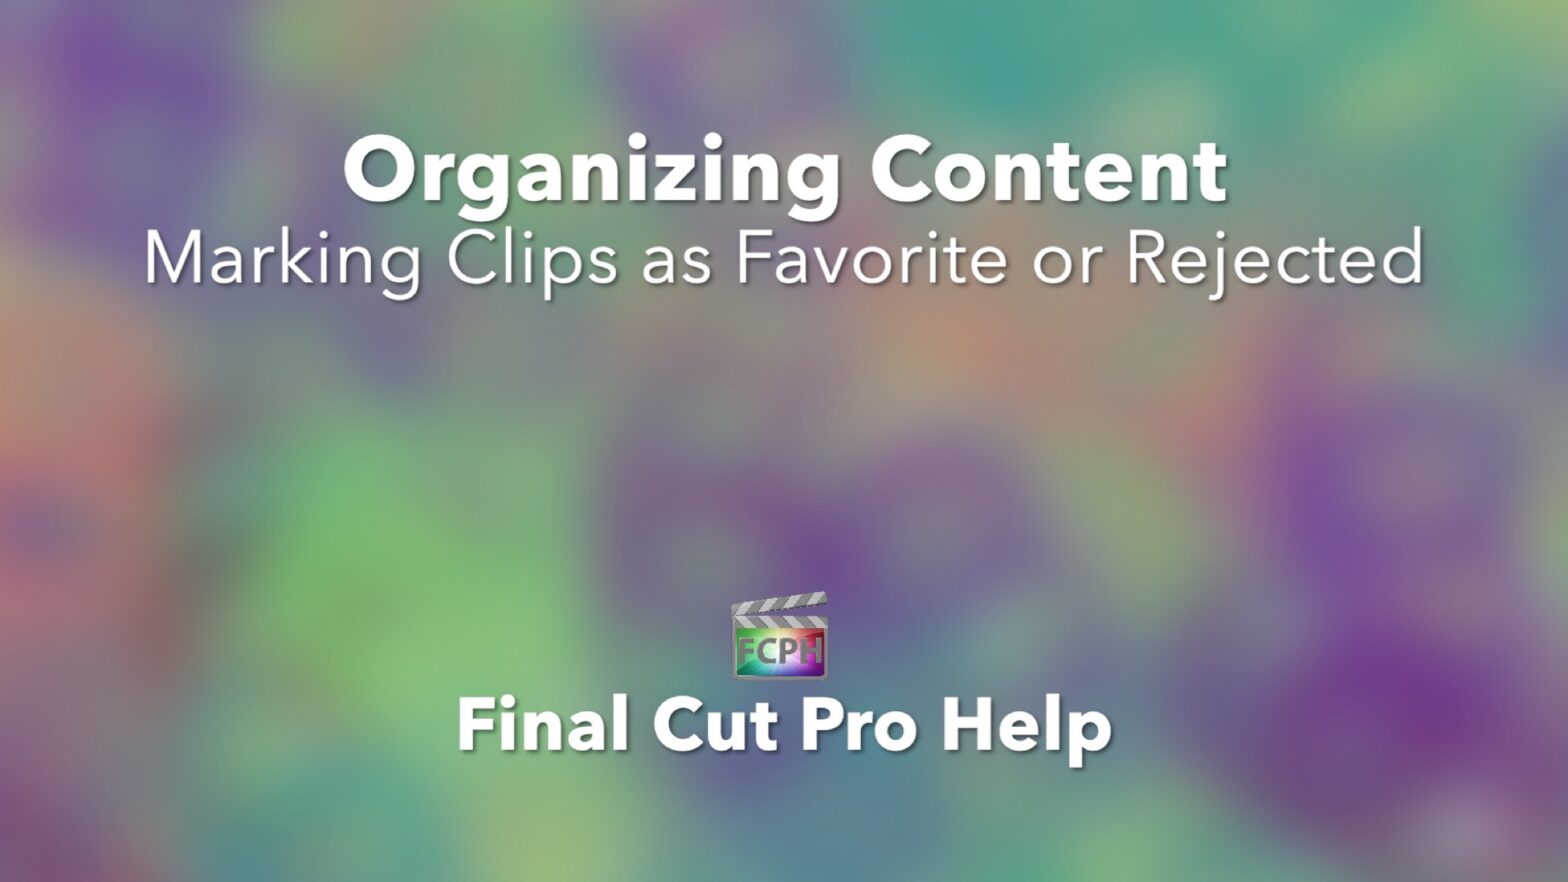 Marking Clips as Favorite or Rejected